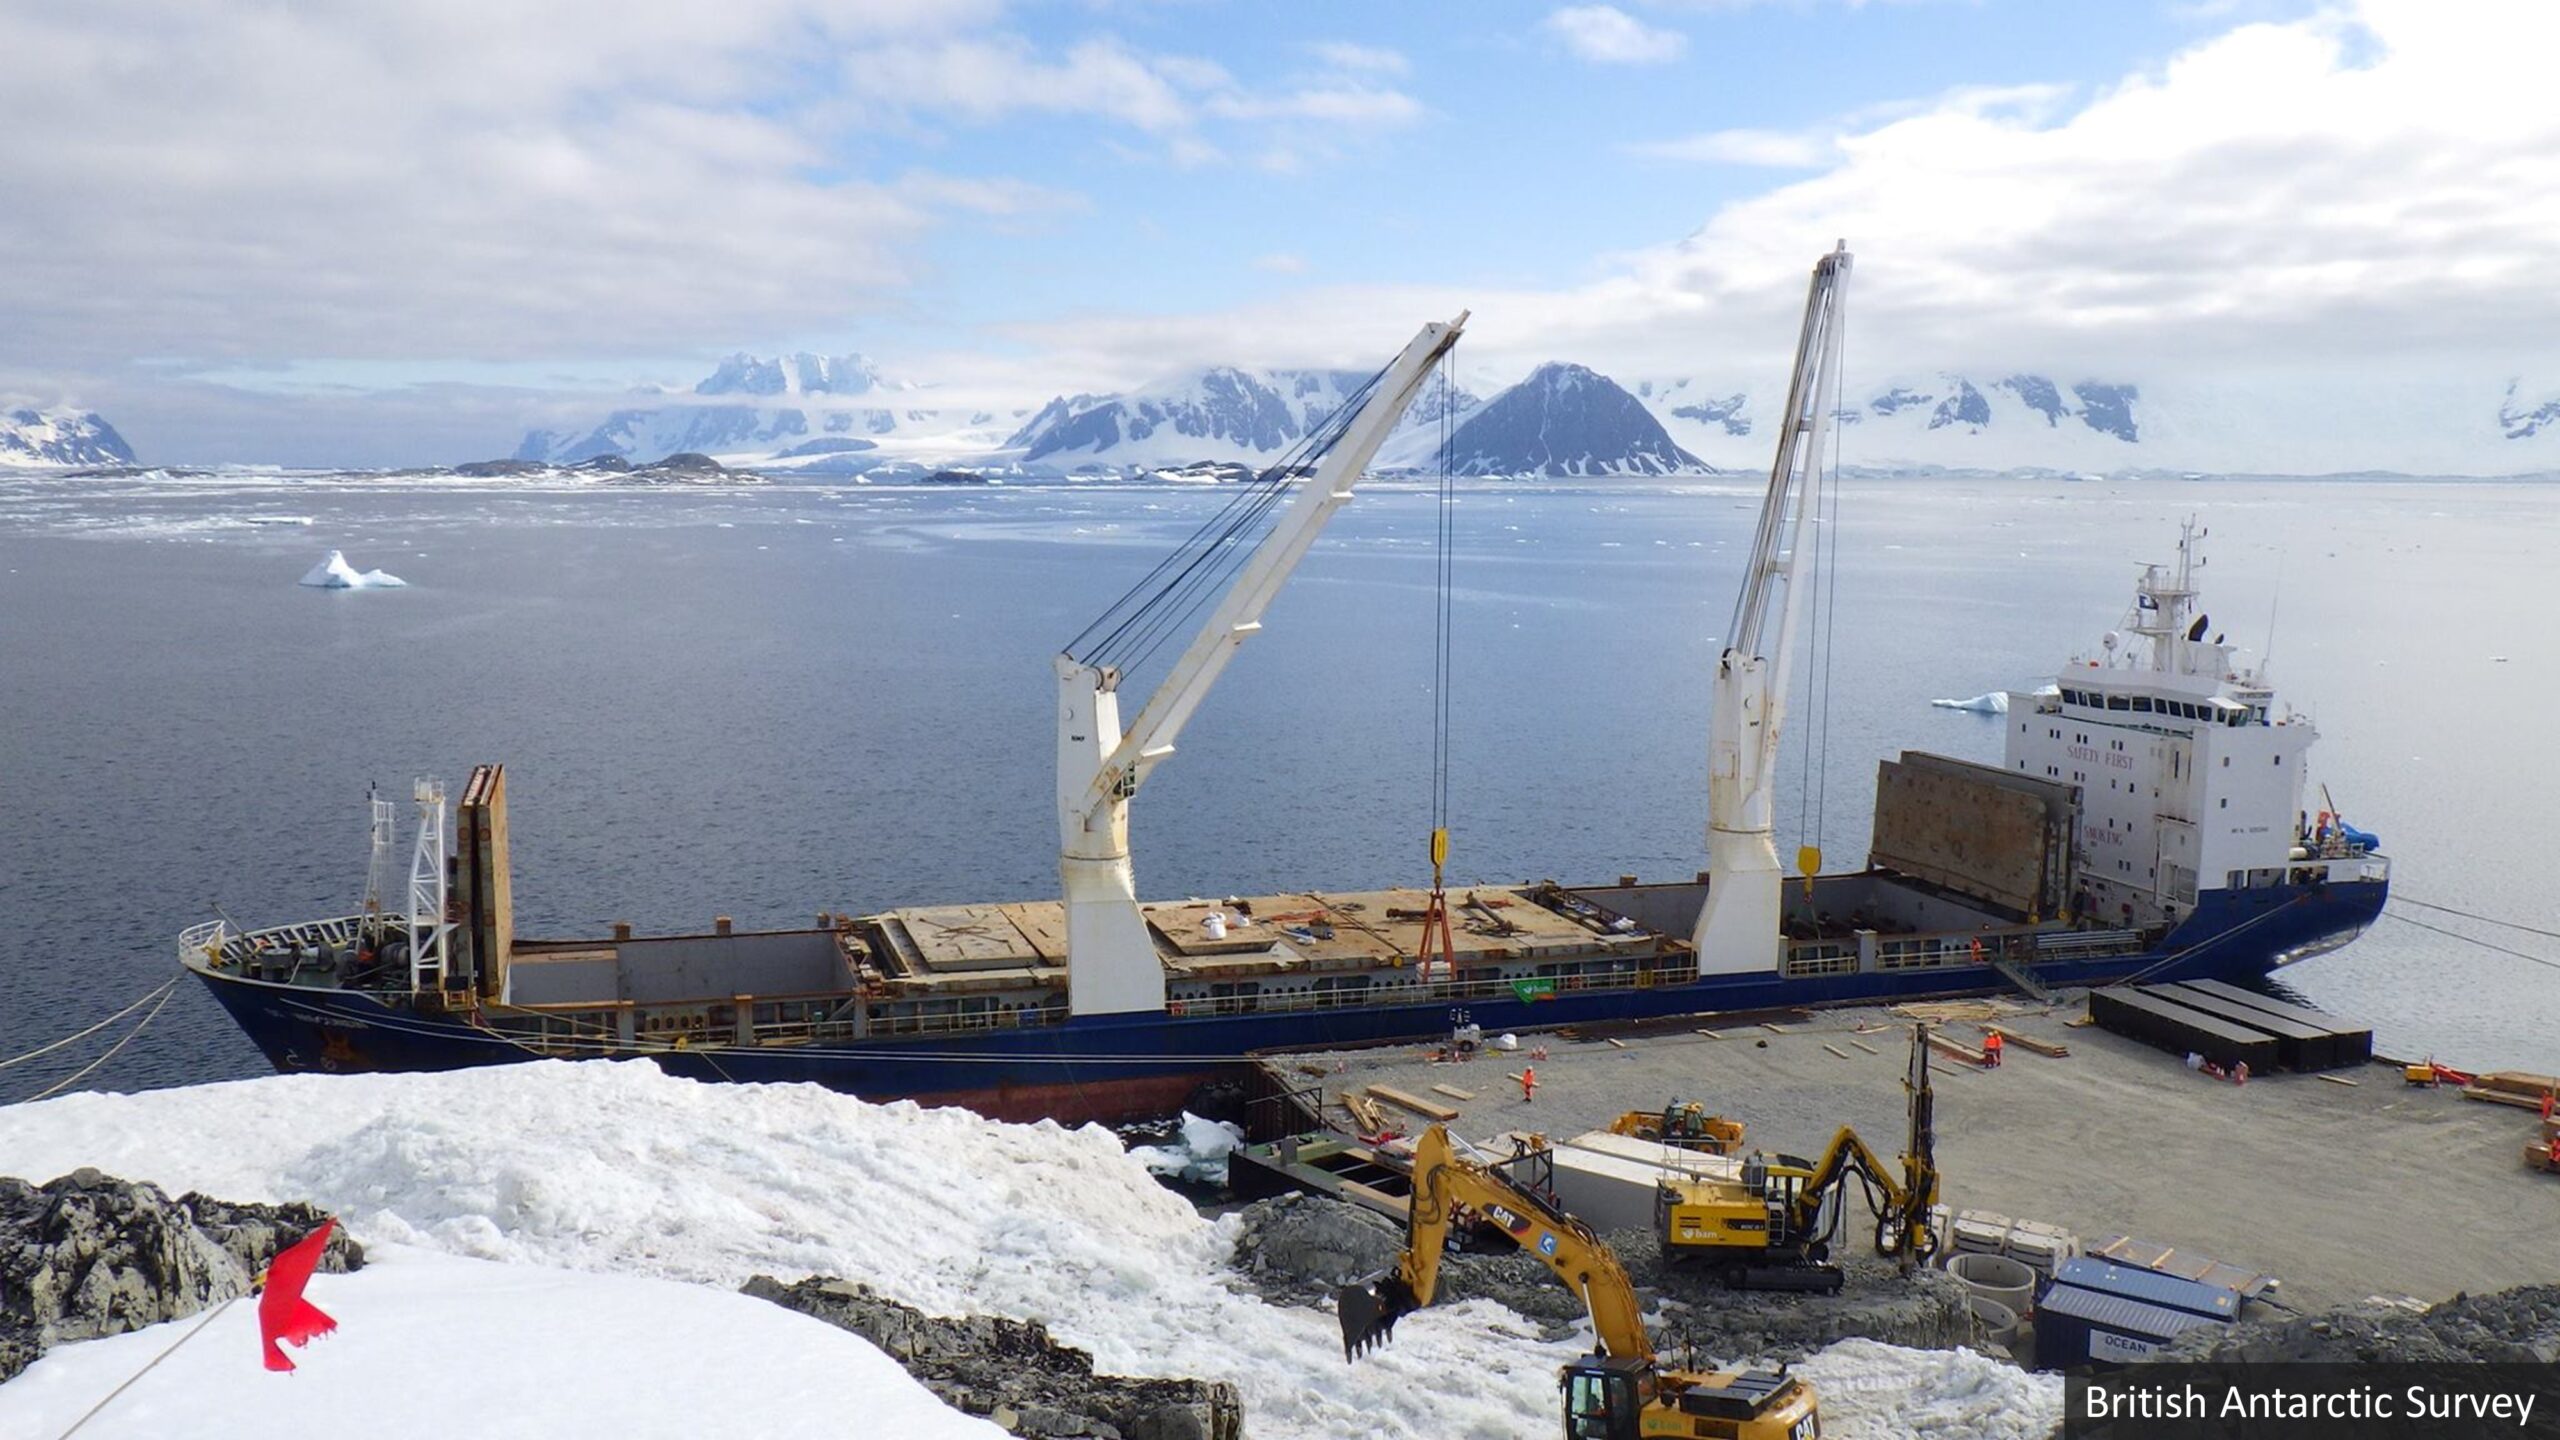 Morris Machinery is cool with major order for Antarctic project